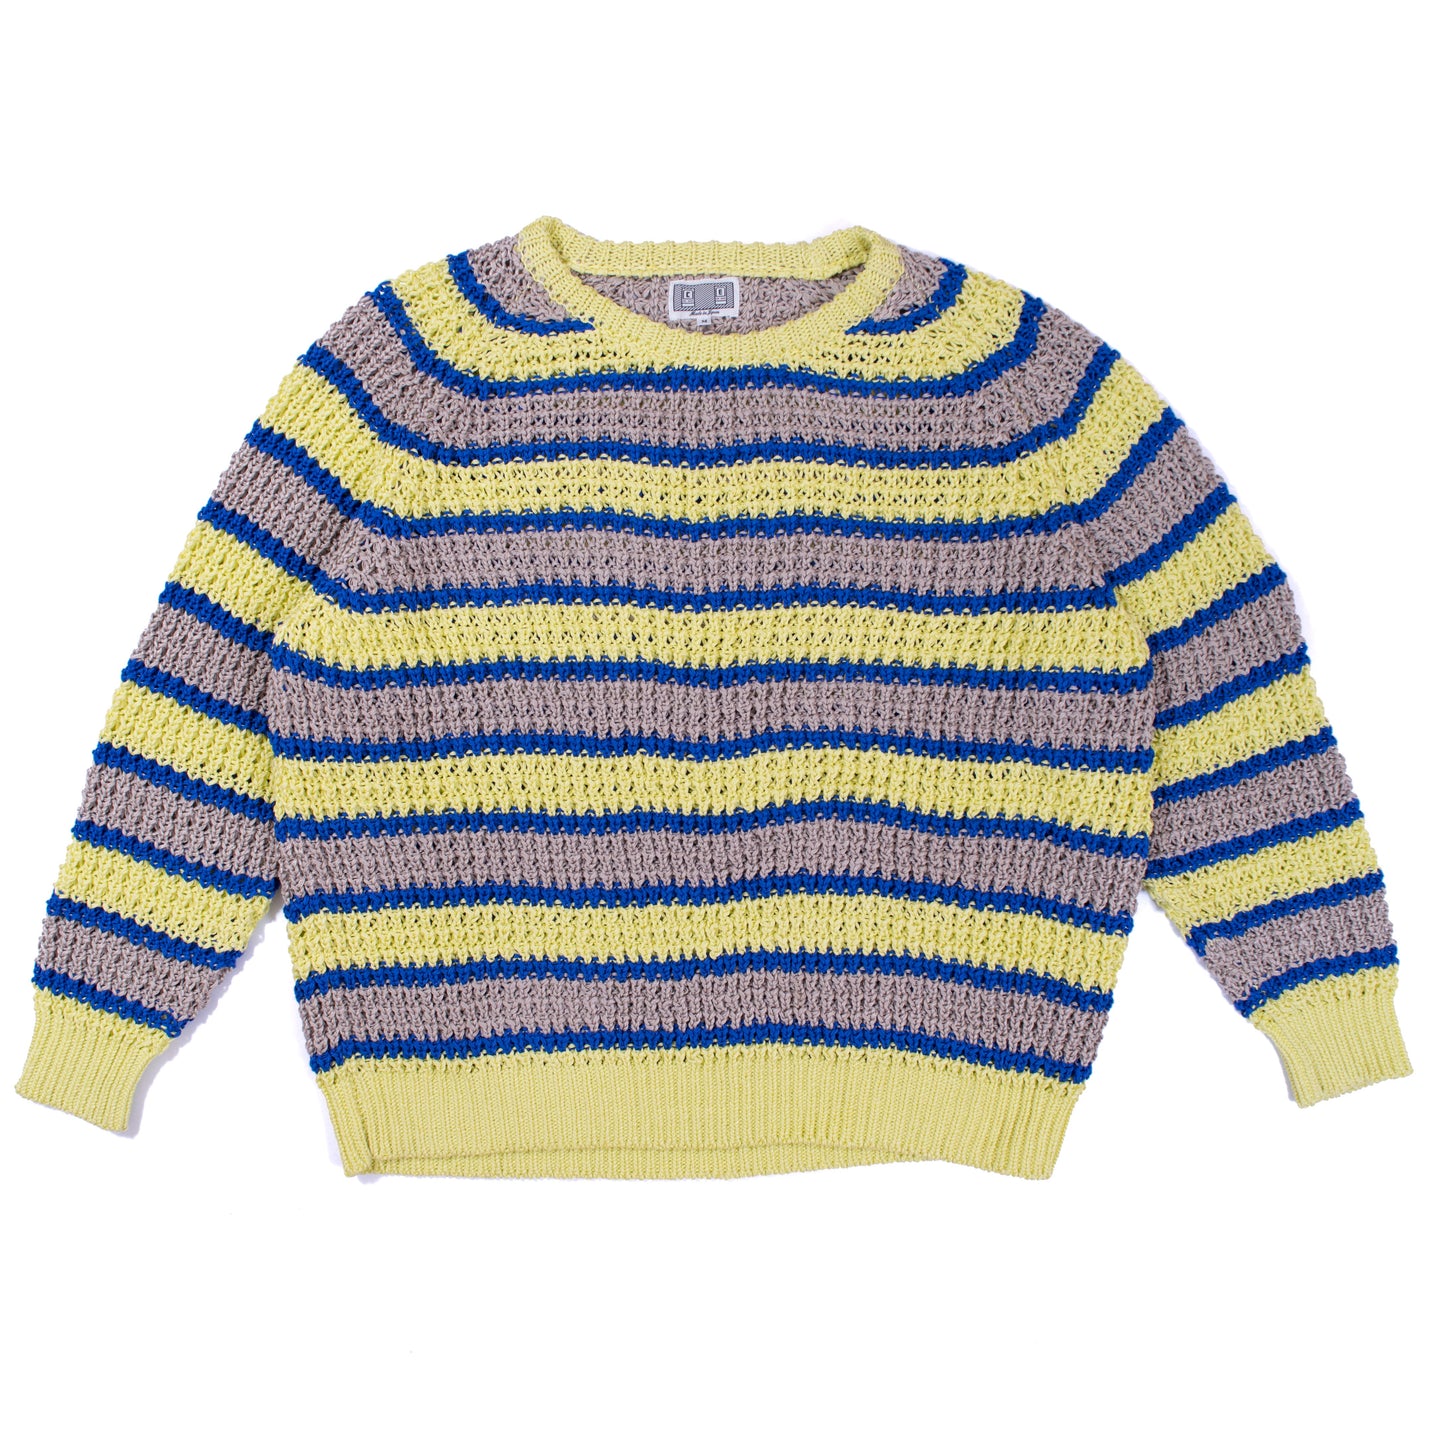 Cav Empt Stripe Loose Waffle Knit #2 (2018AW)